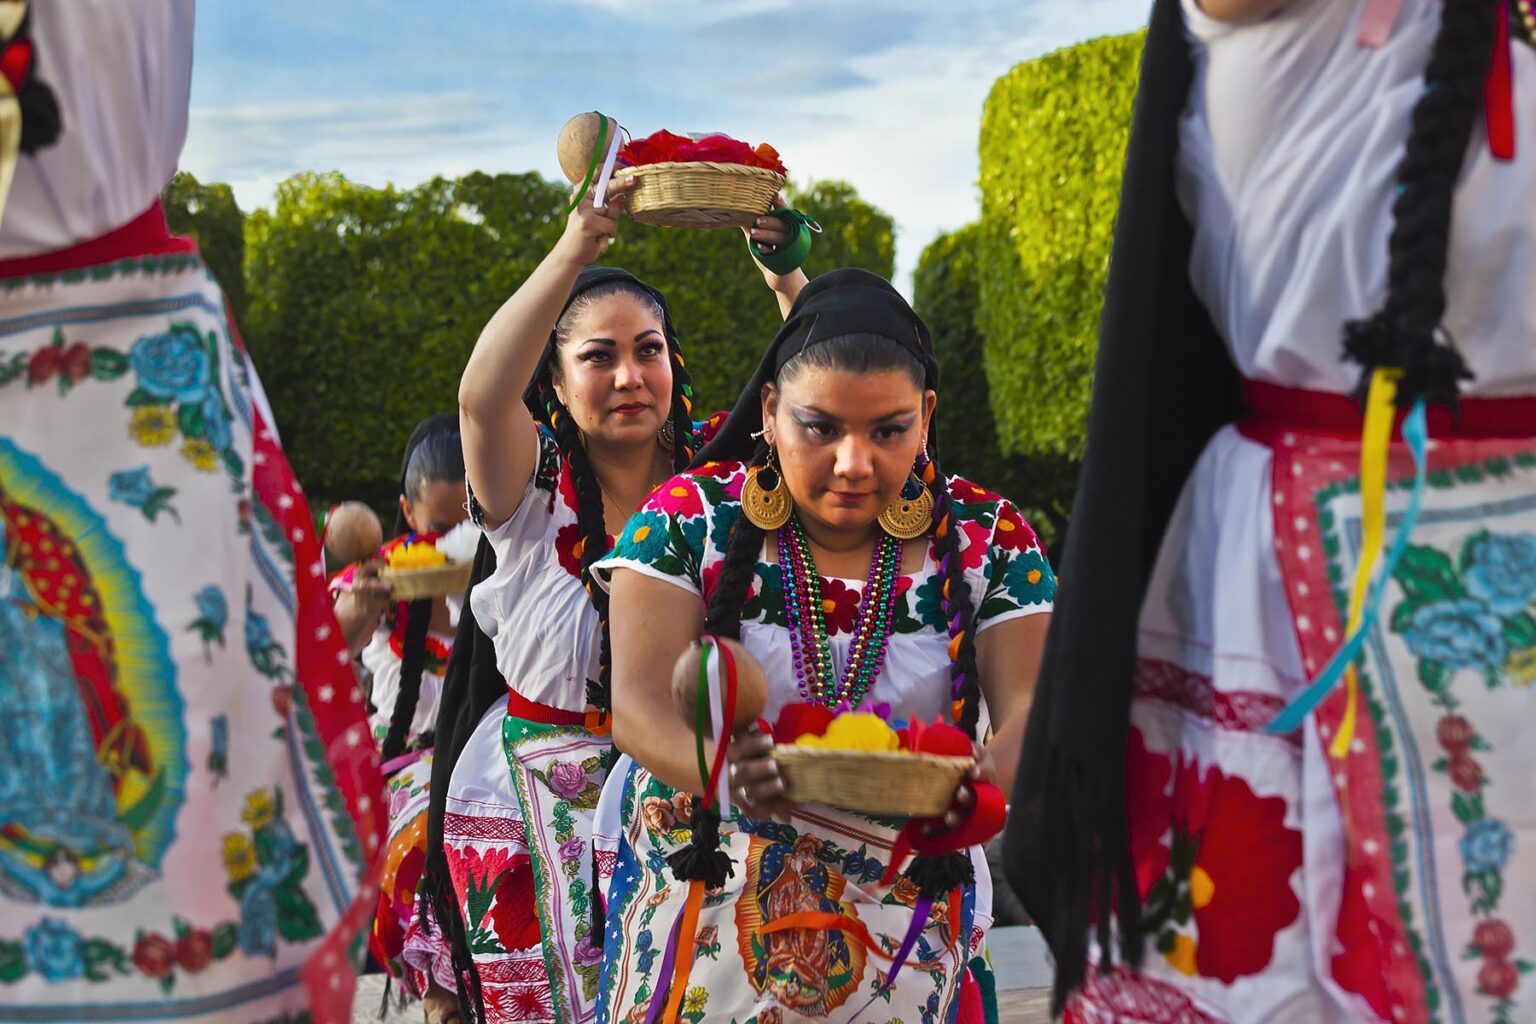 DANCERS perform in the Jardin or Central Square during the annual FOLK DANCE FESTIVAL - SAN MIGUEL DE ALLENDE, MEXICO